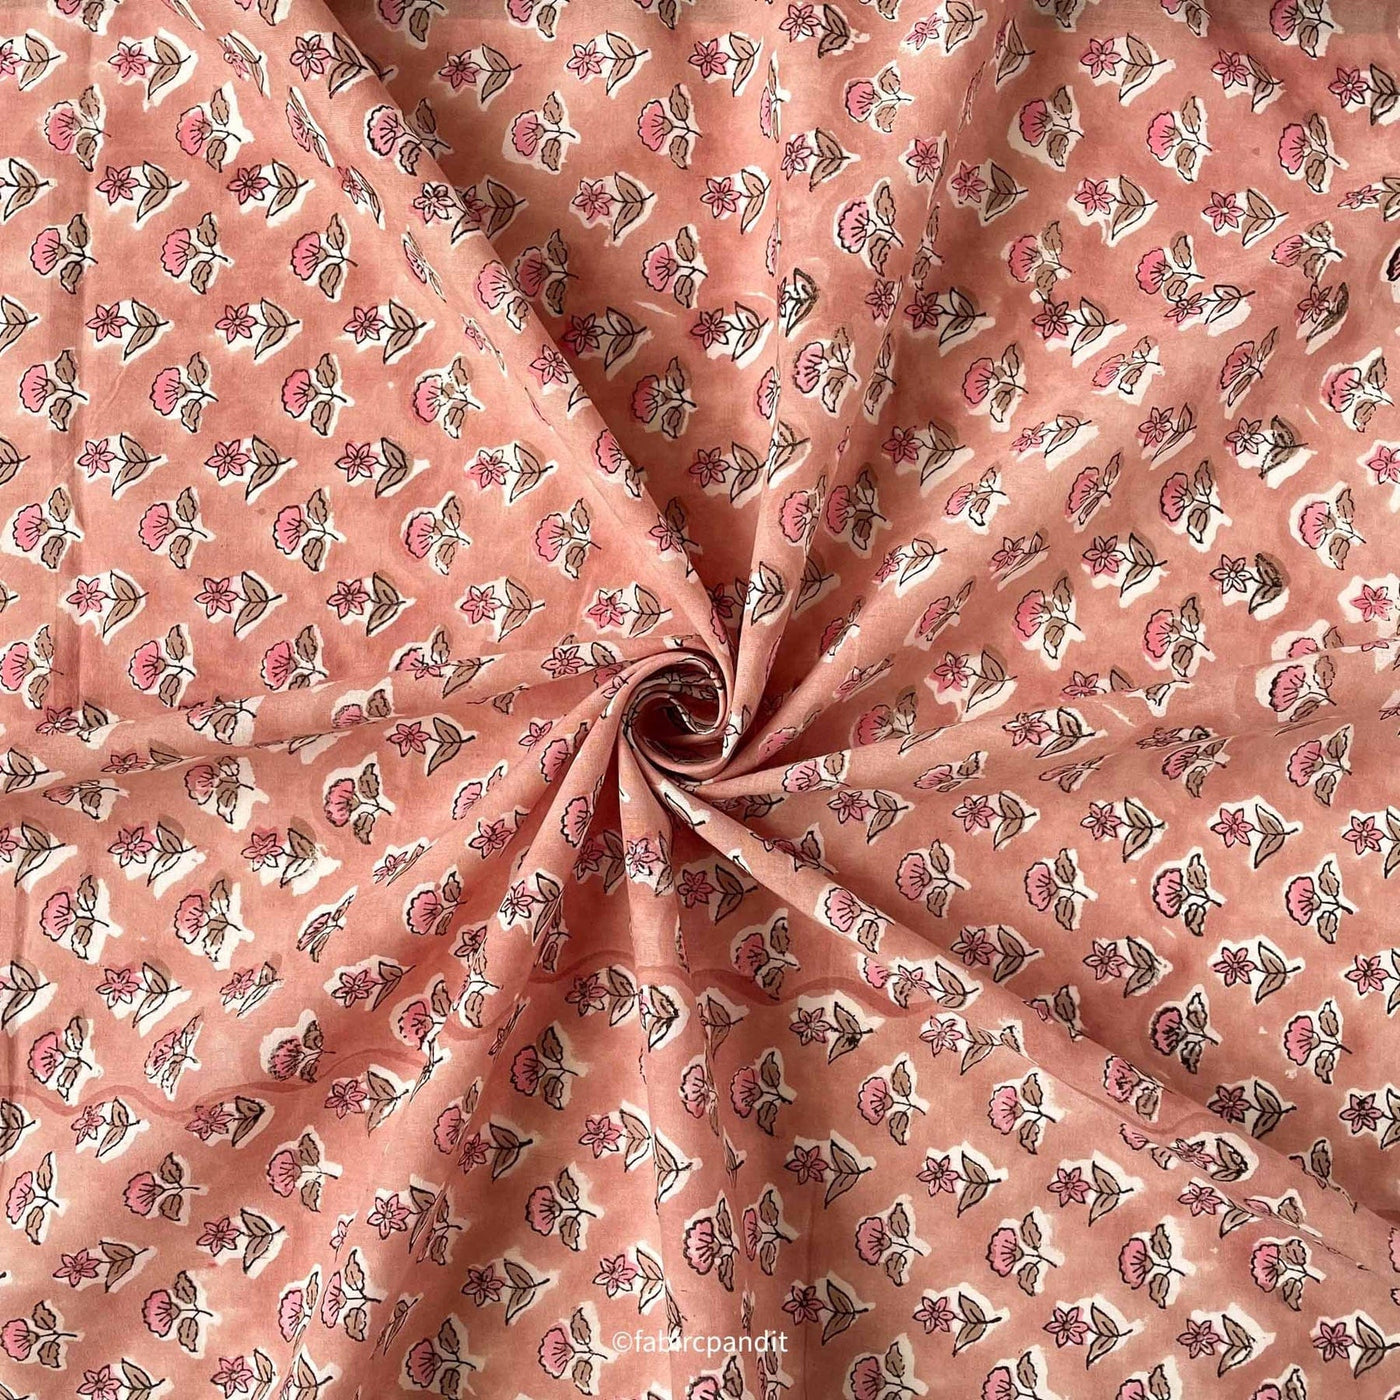 Fabric Pandit Fabric Soft Peach Mughal Flower Pattern Hand Block Printed Pure Cotton Fabric (Width 43 inches)